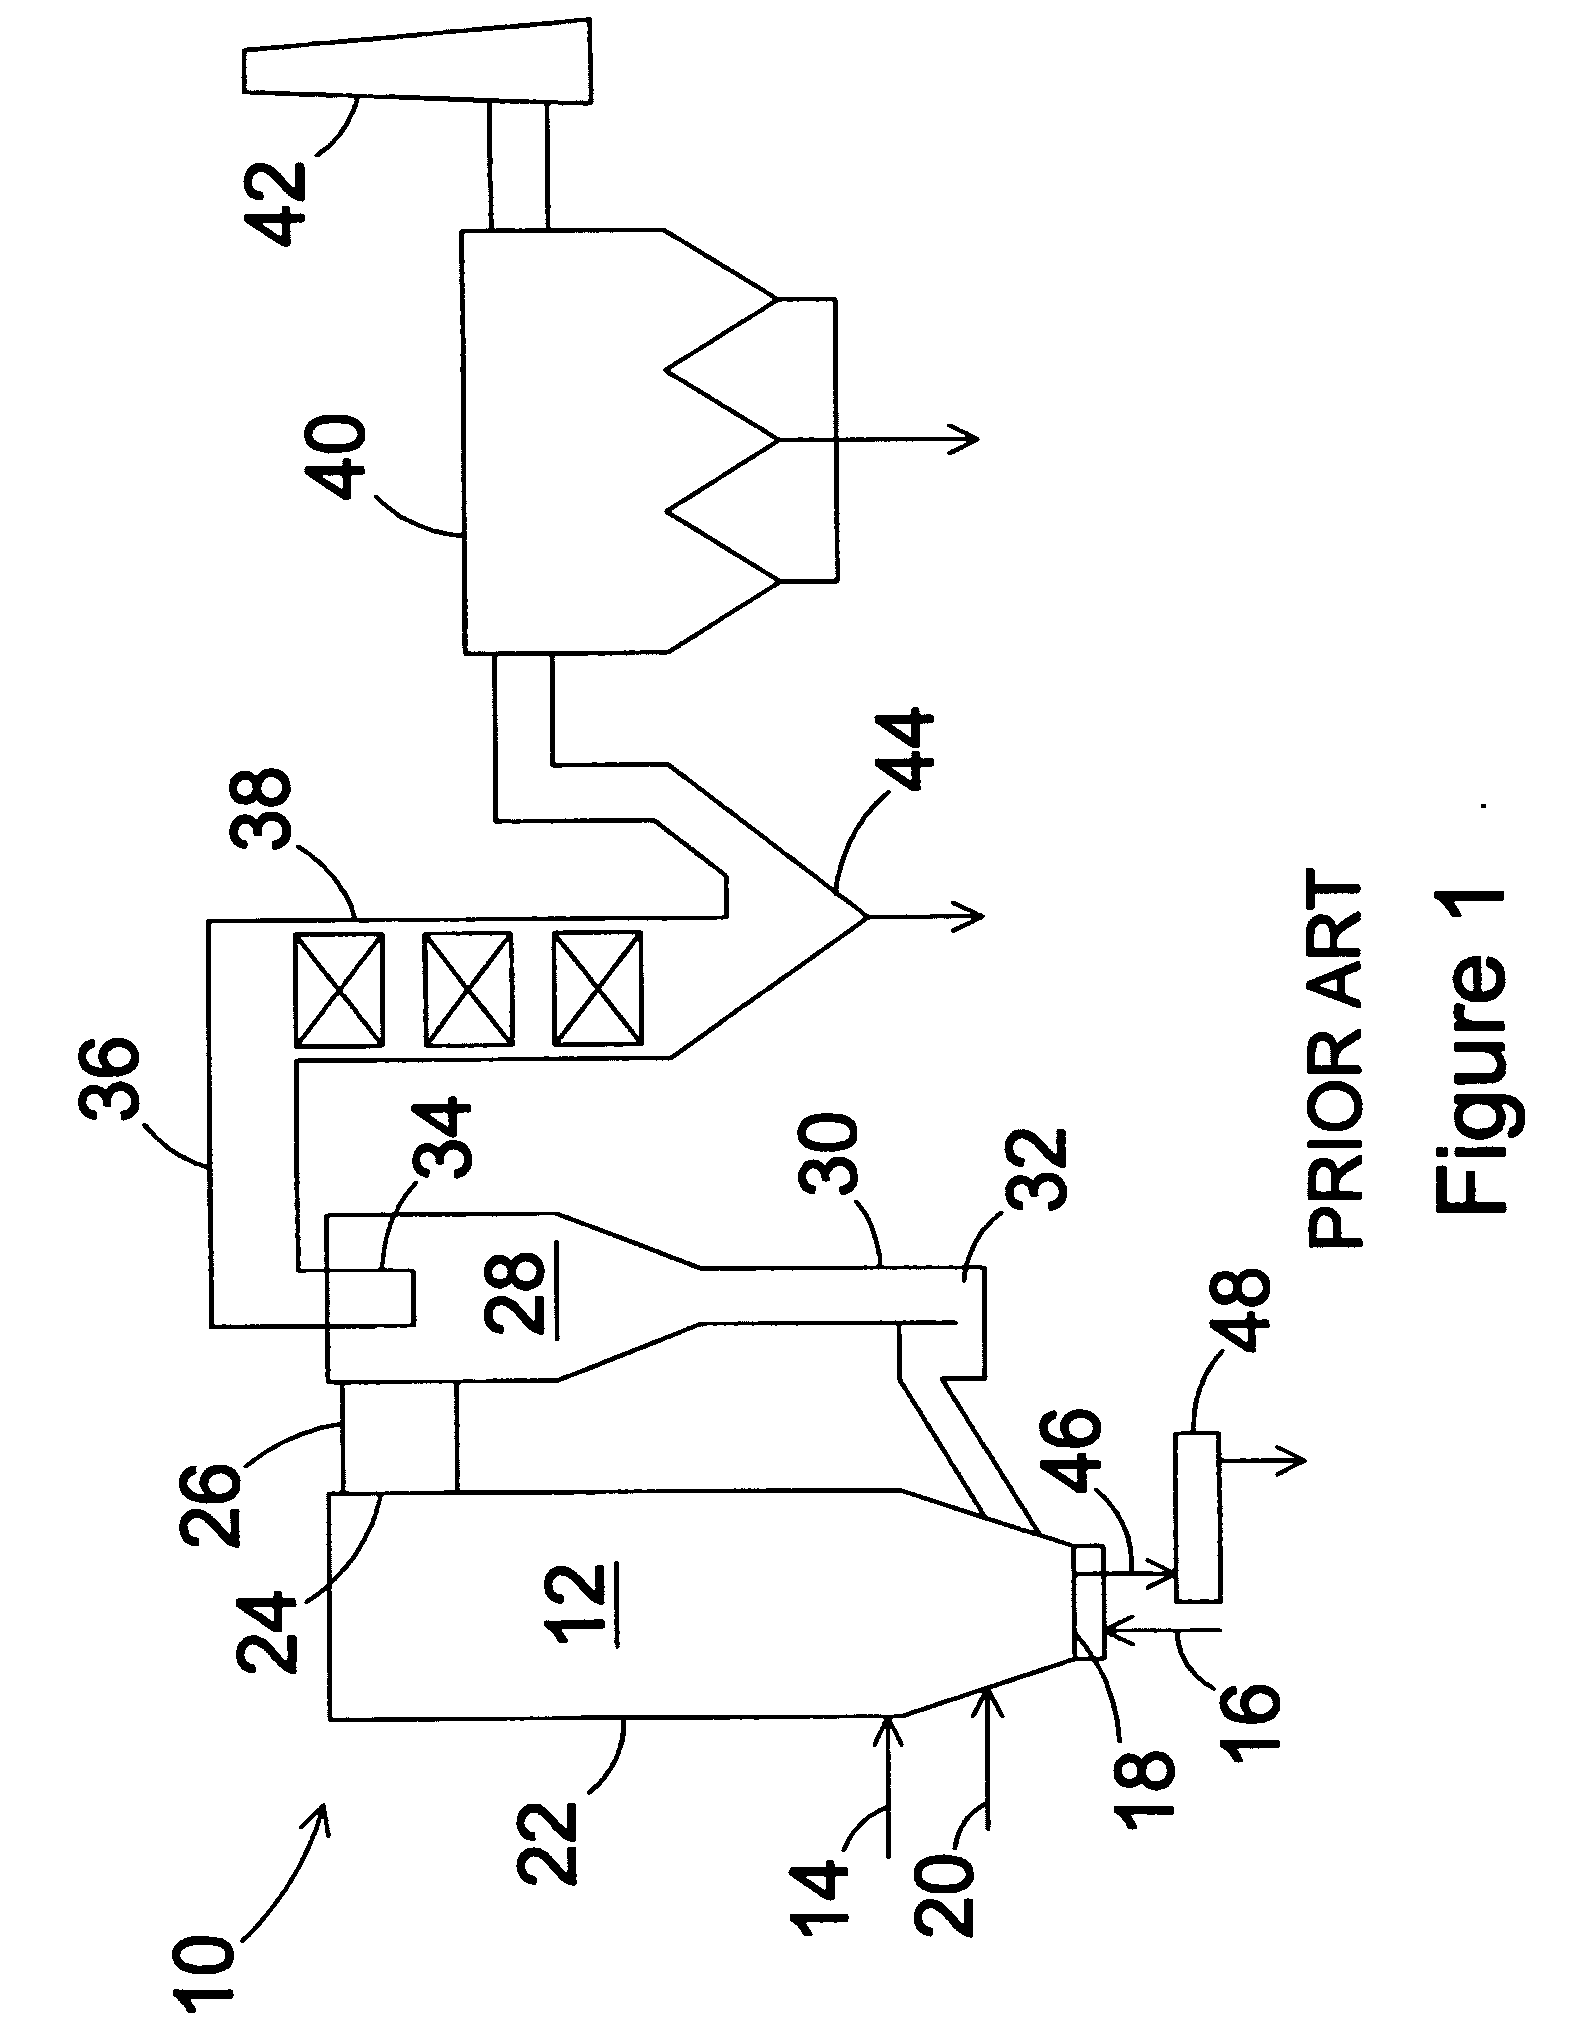 Cyclone bypass for a circulating fluidized bed reactor